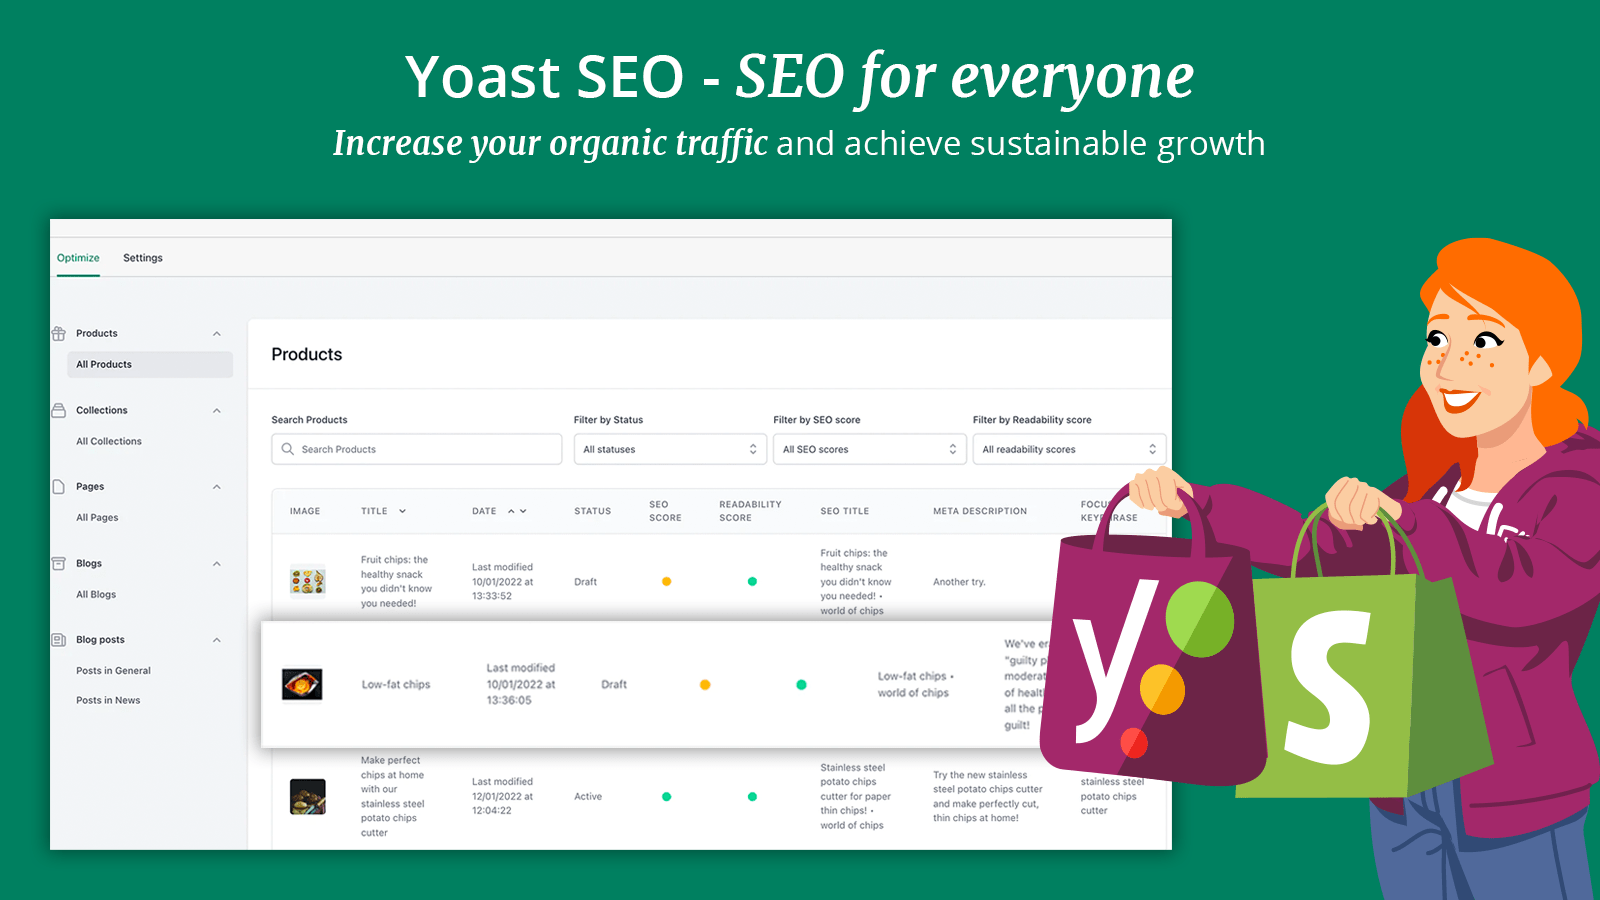 Yoast SEO ‑ SEO for everyone - Increase organic traffic, technical SEO & get rich results! | Shopify App Store